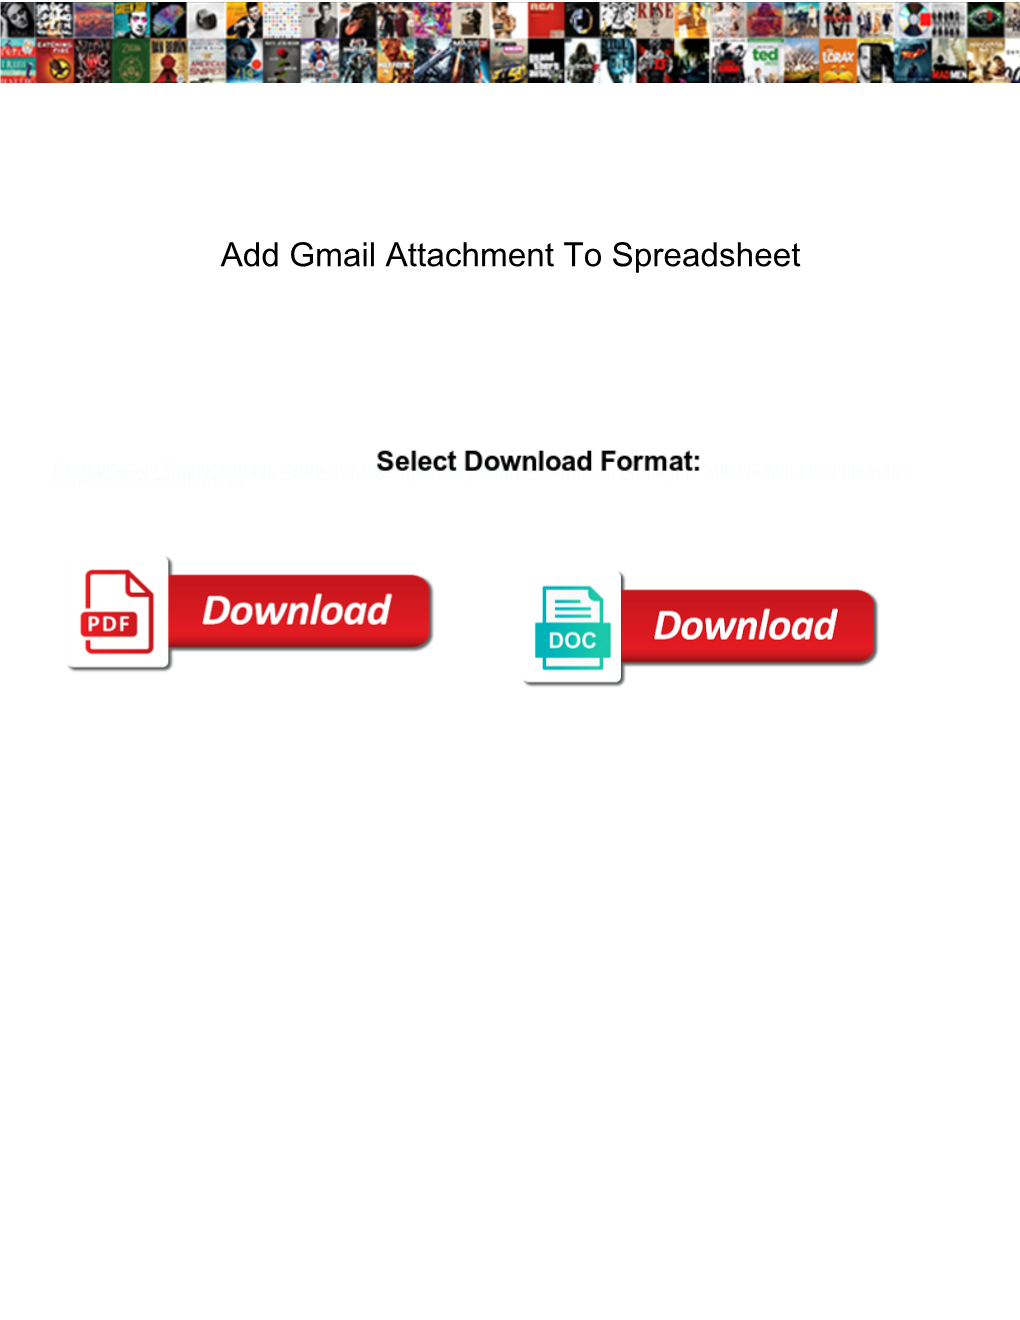 Add Gmail Attachment to Spreadsheet